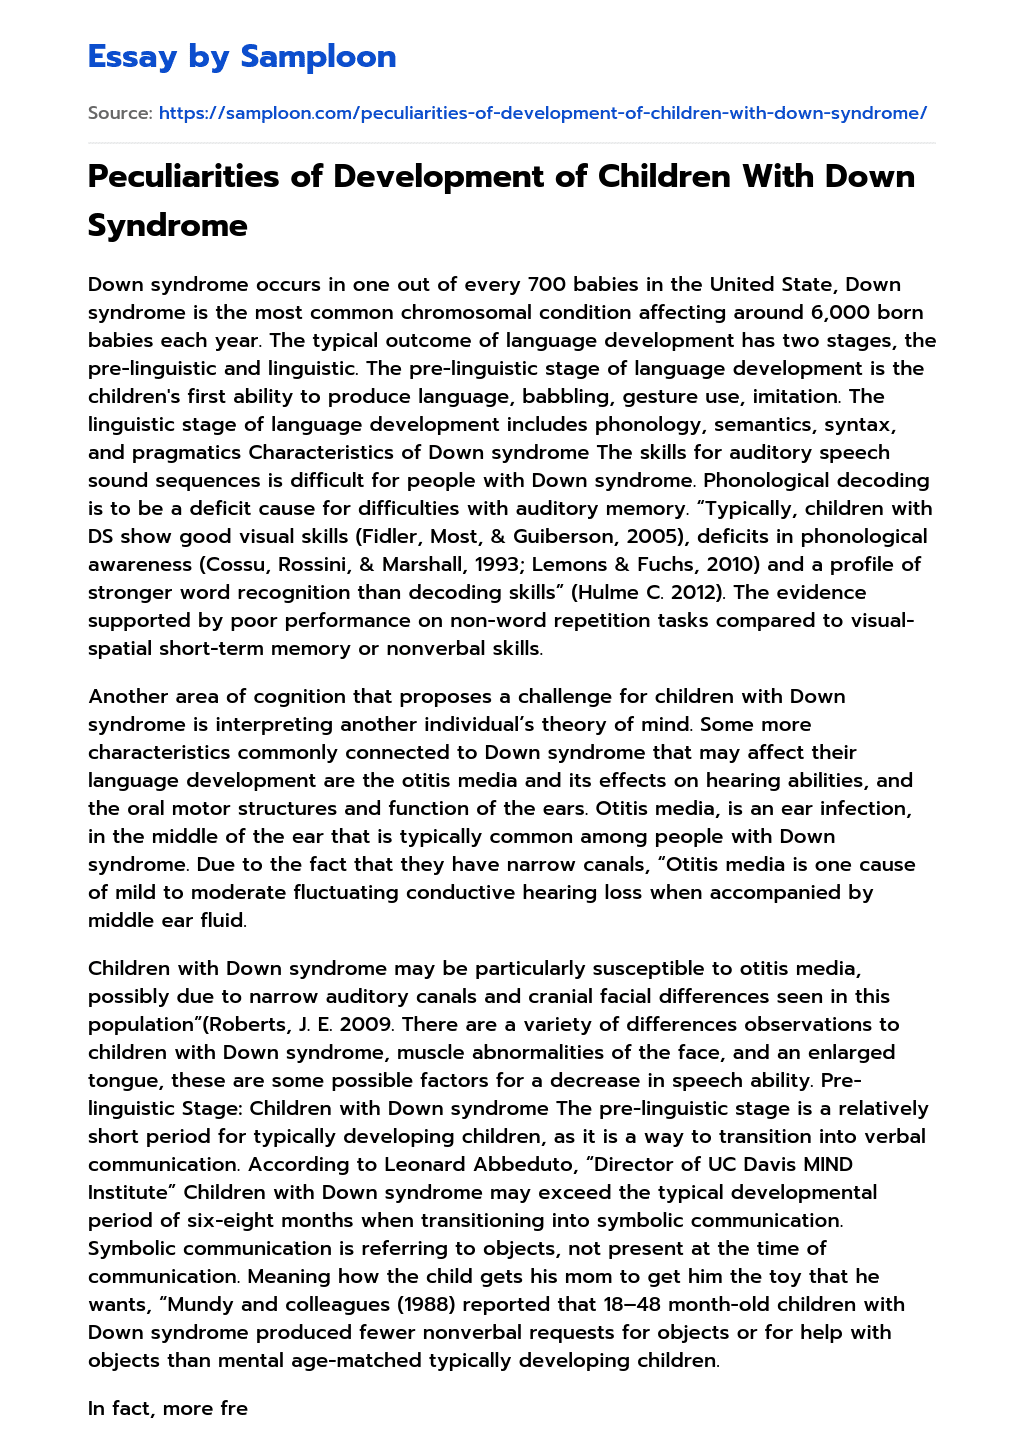 down syndrome essay conclusion